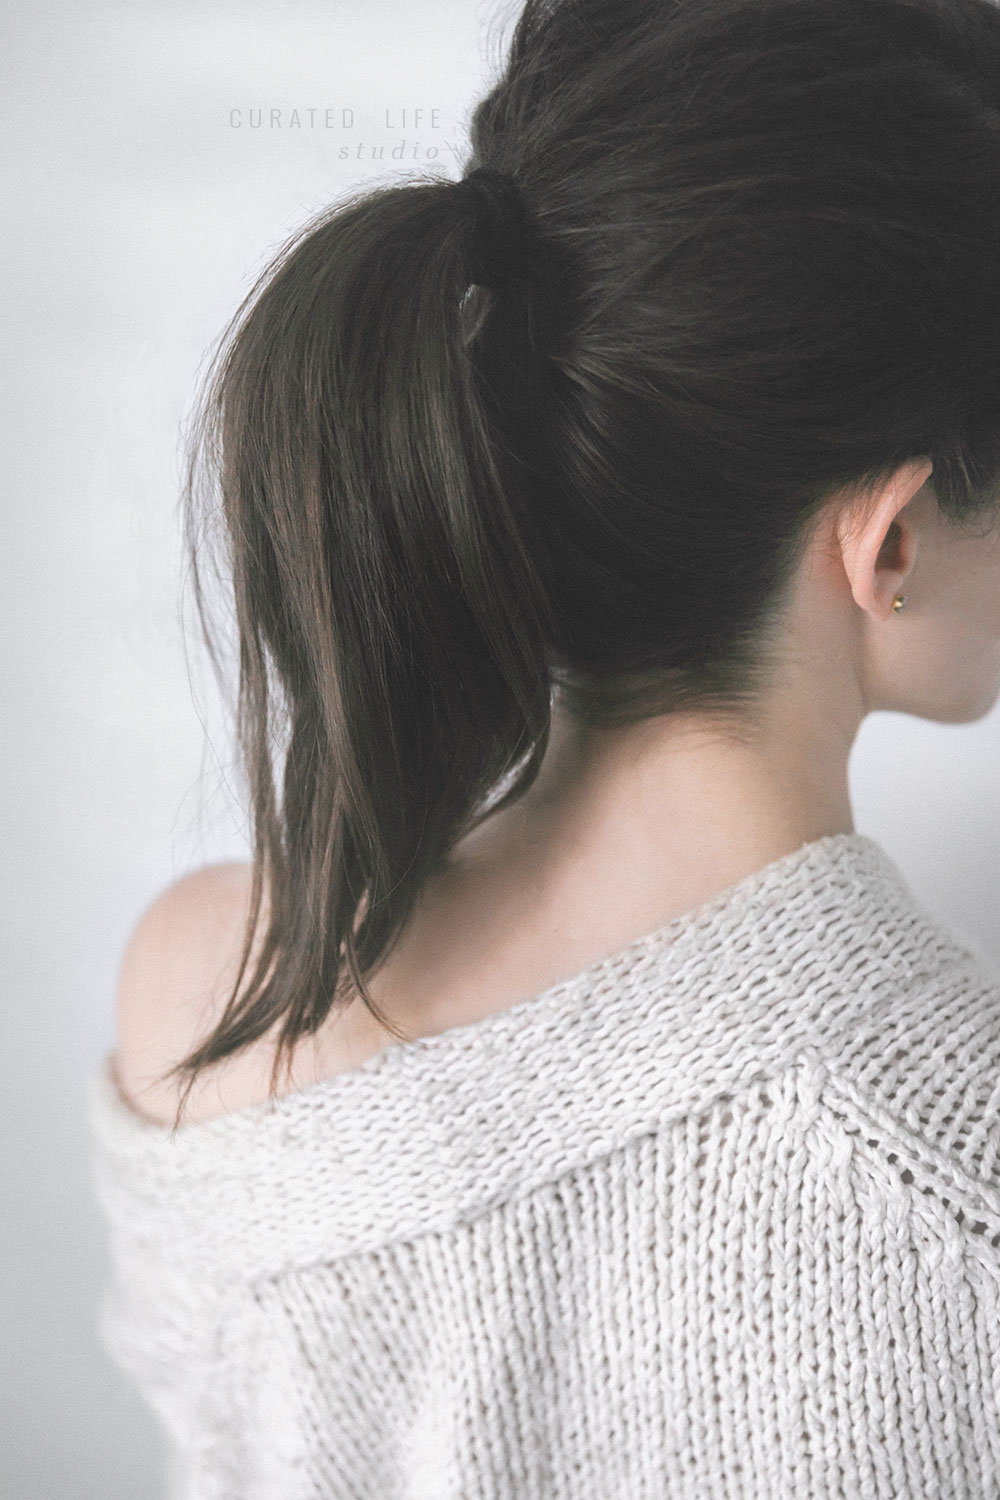 A girl faces a wall with a large woollen robe draped over her shoulder. Her hair is dark, brunette and tied messily in a ponytail. On a white wall beside her, faint lines of light paint the wall, reminiscent of the morning. 